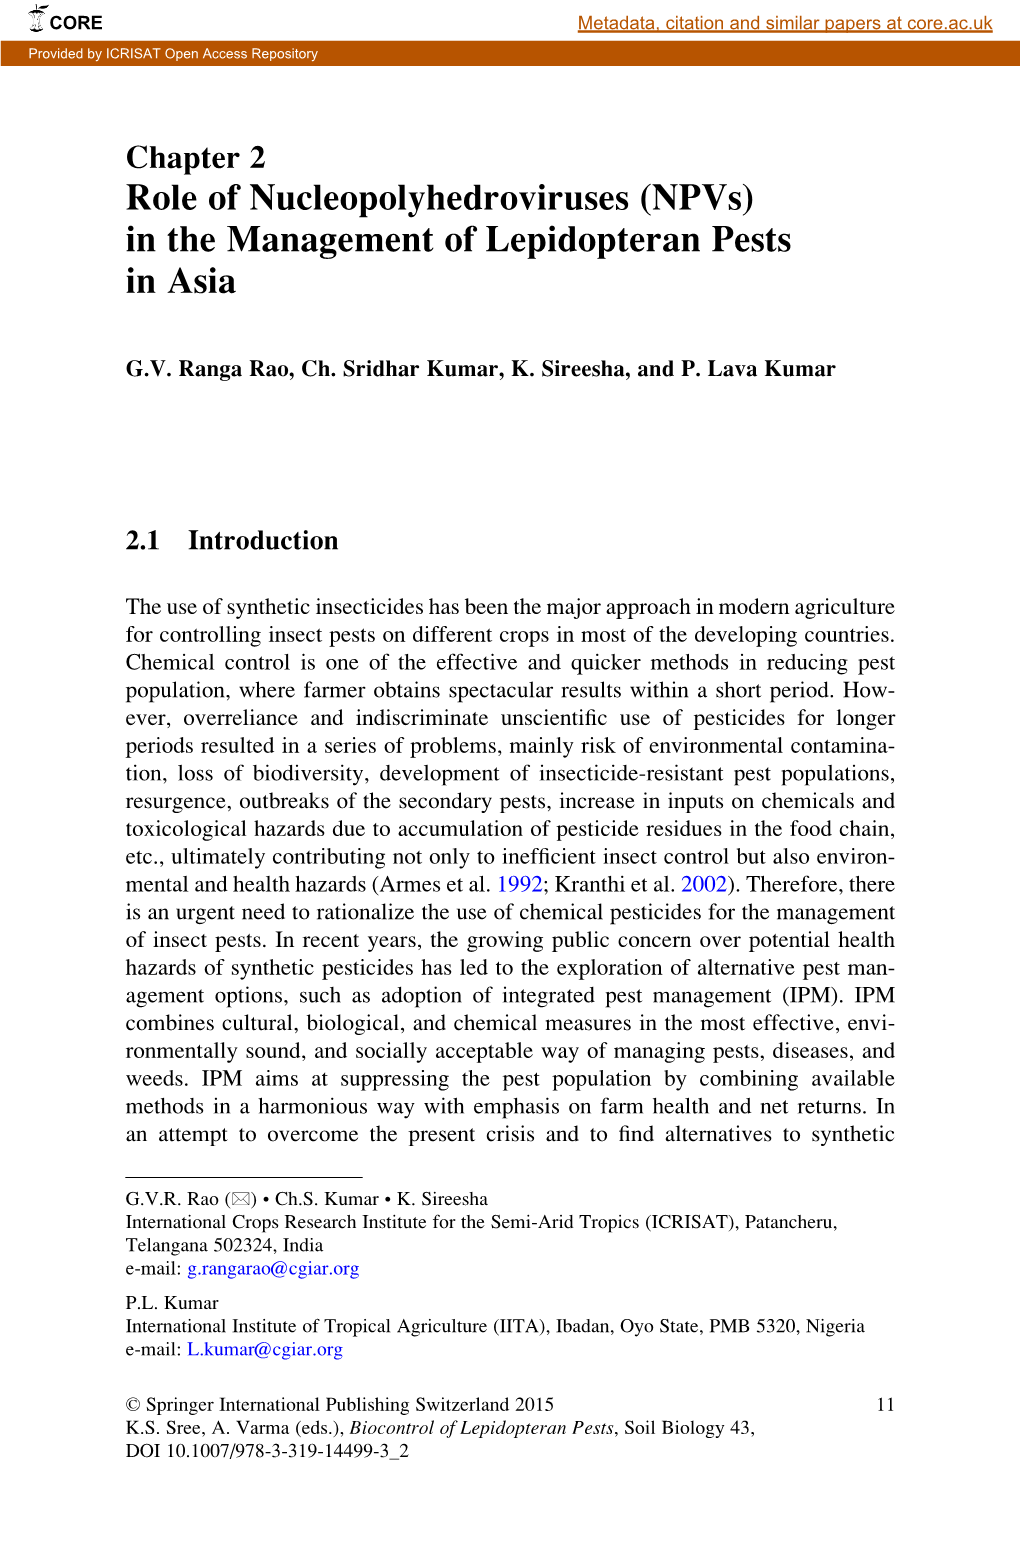 In the Management of Lepidopteran Pests in Asia